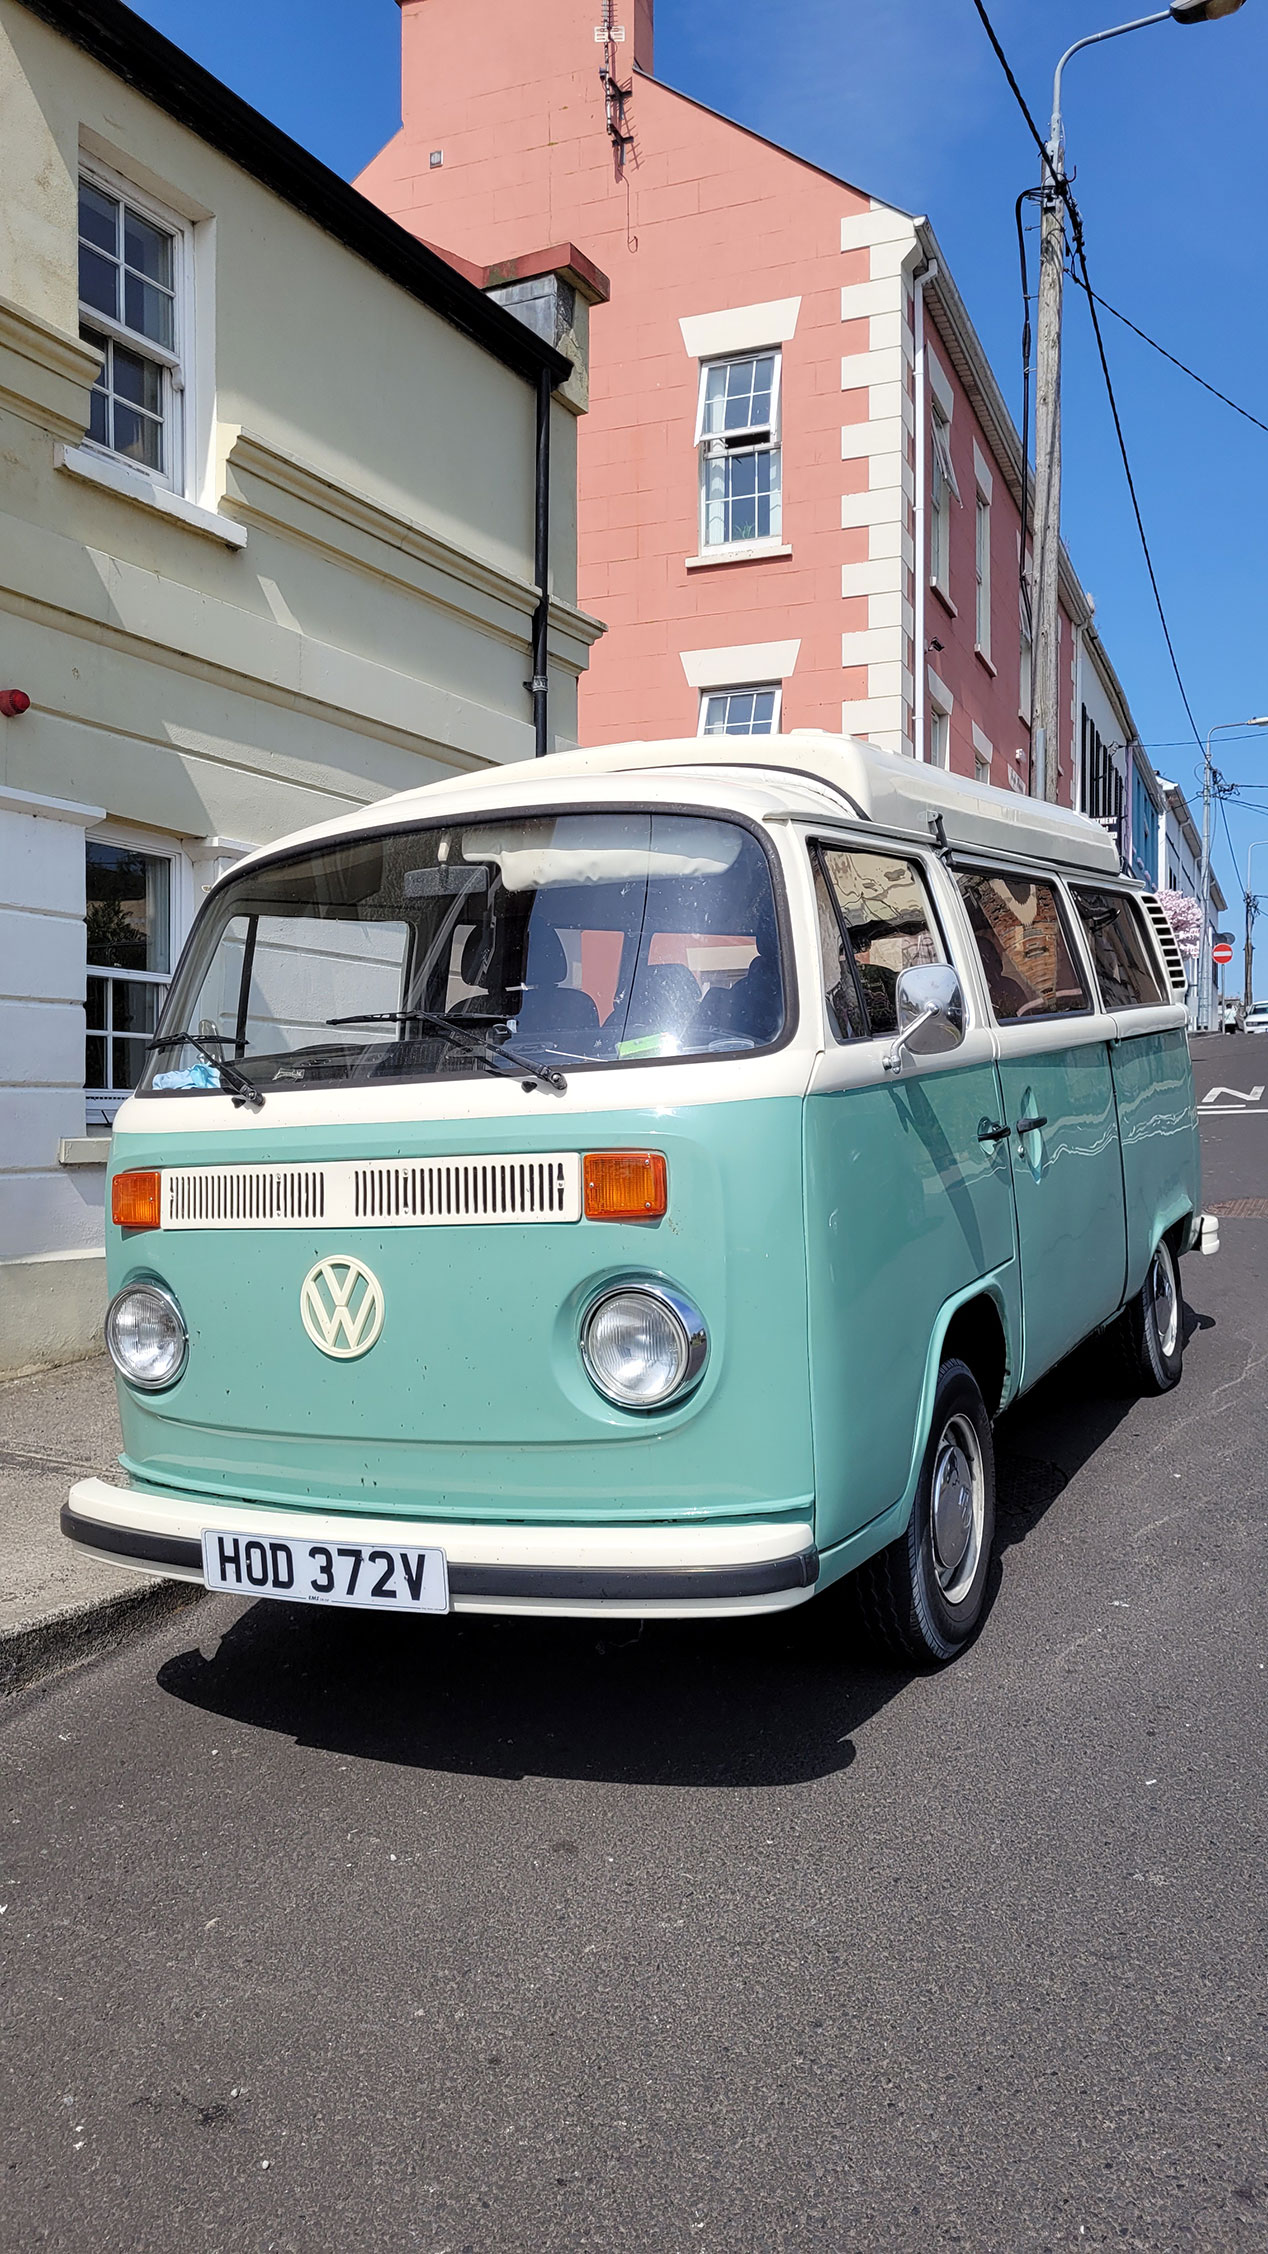 VW in Moville